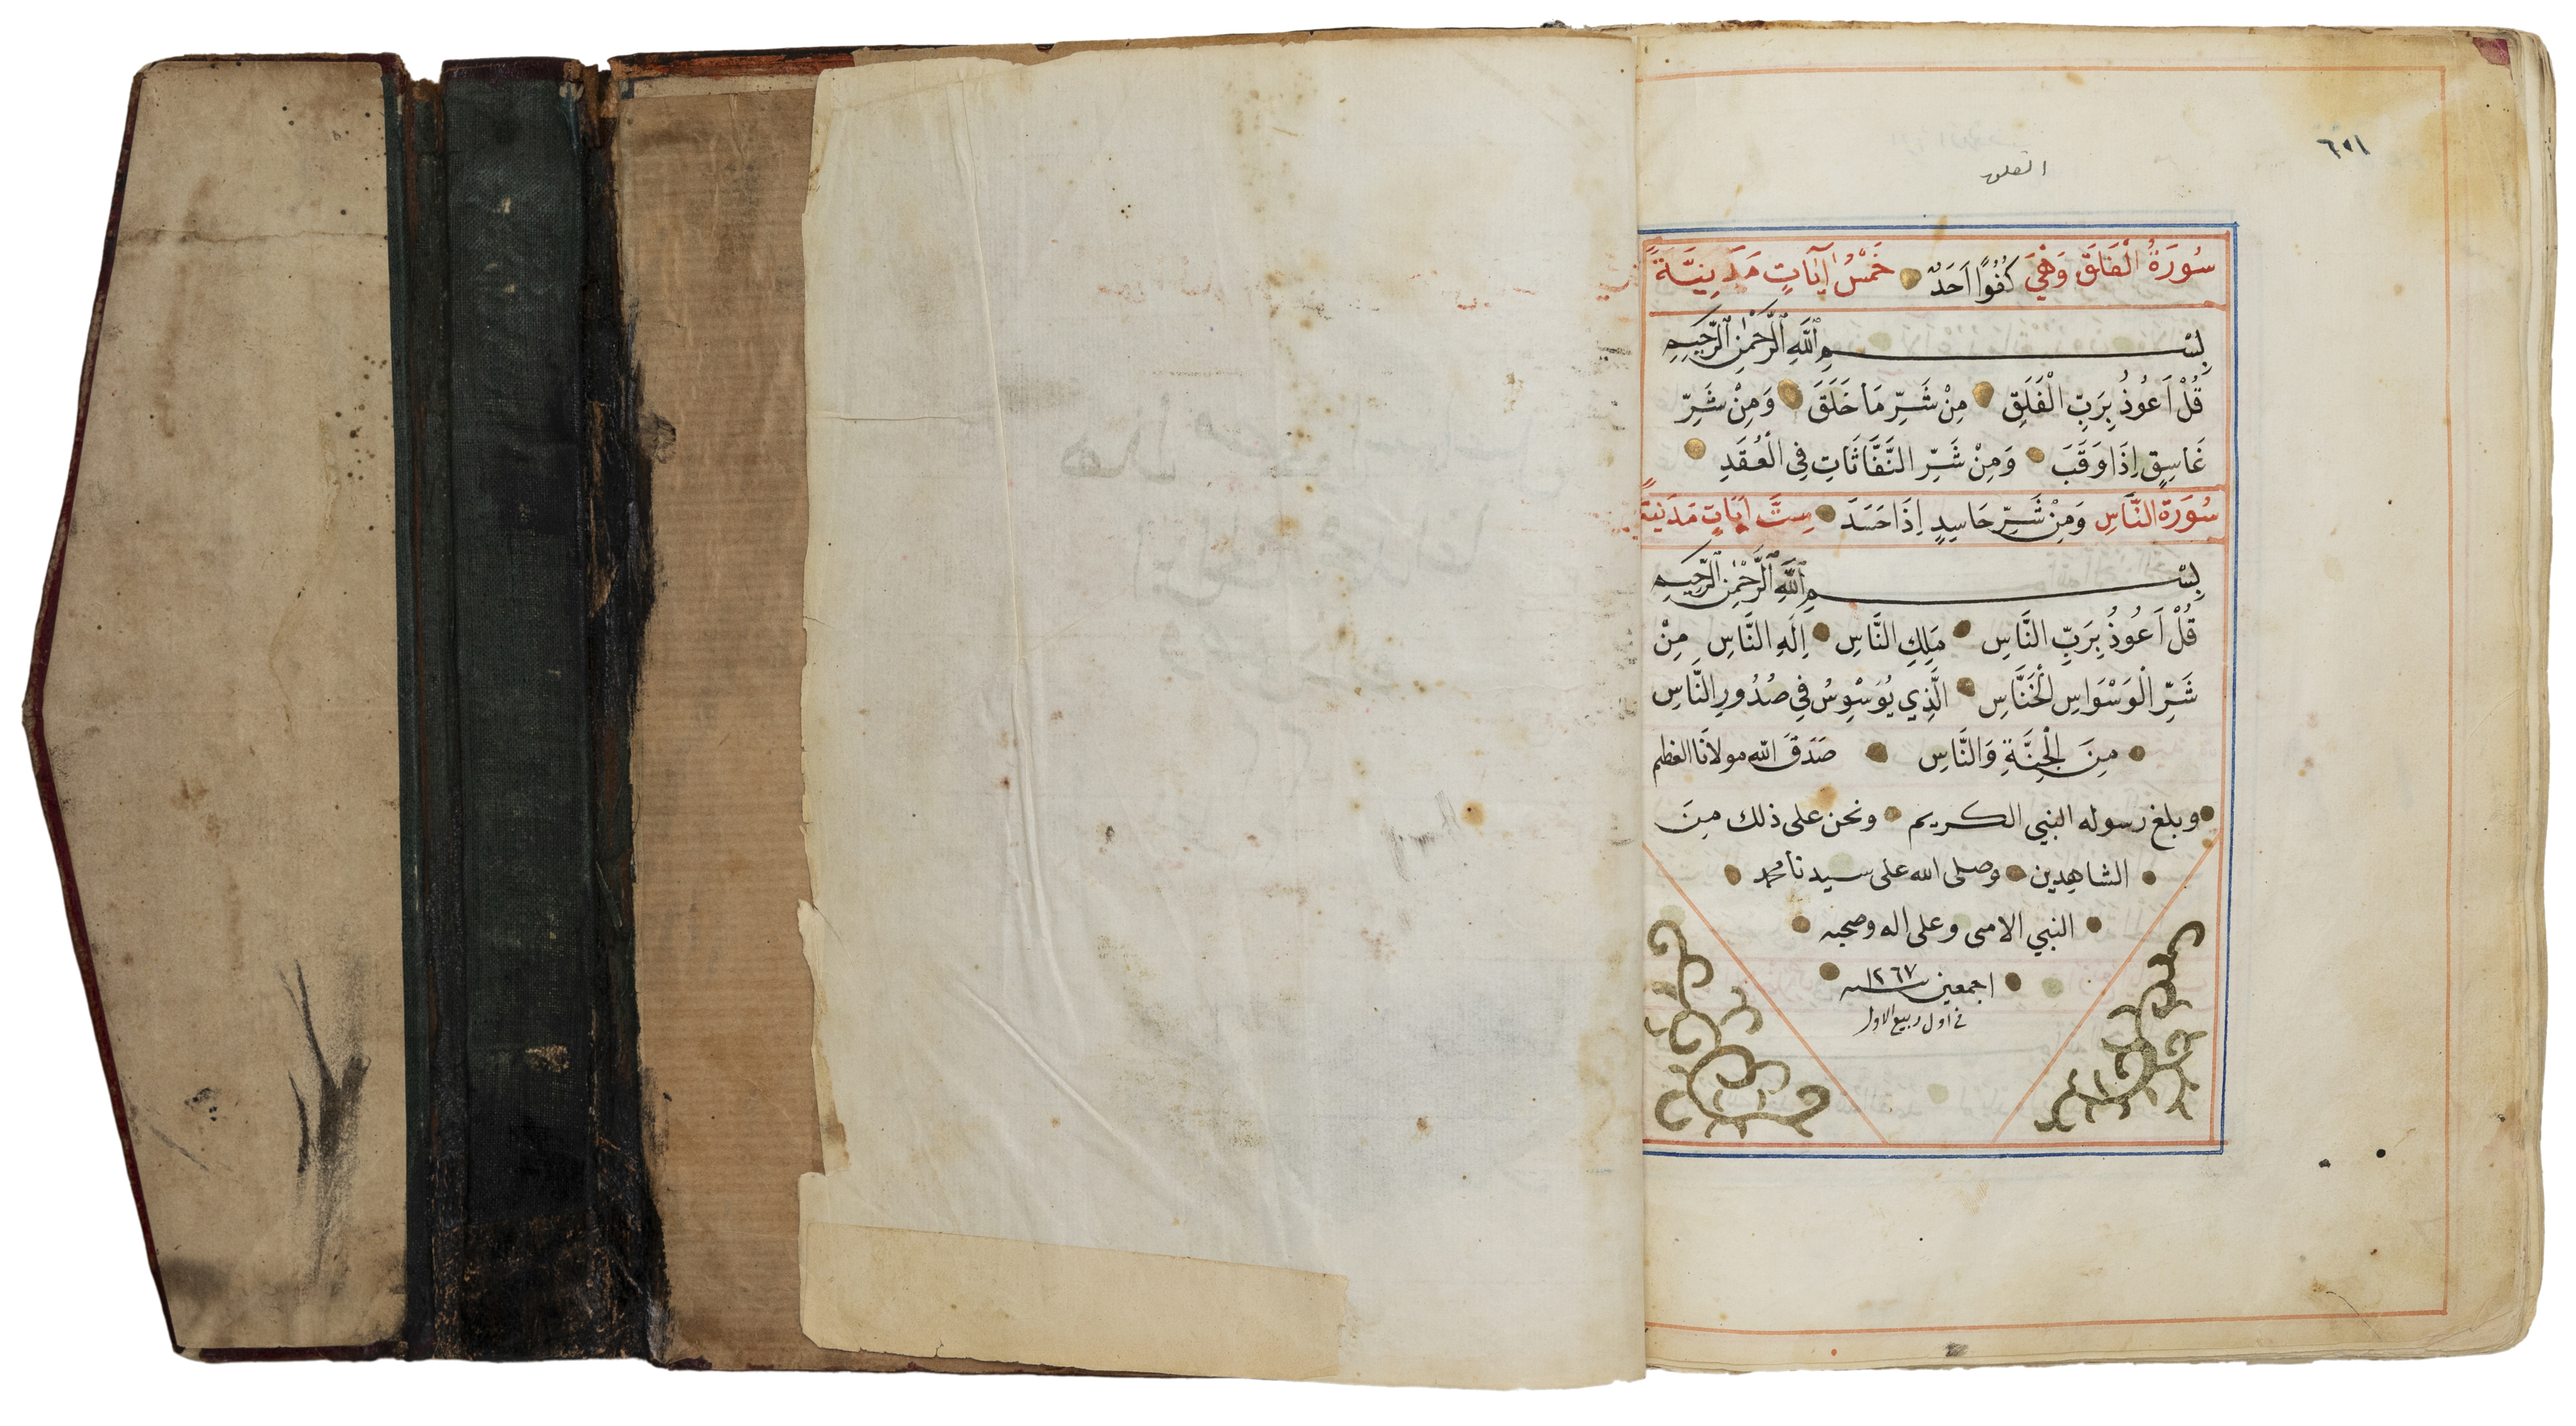 A Qur'an, possibly Balkans, Western Ottoman provinces, dated AH 1267/1850-1 AD, Arabic text on ... - Image 8 of 8